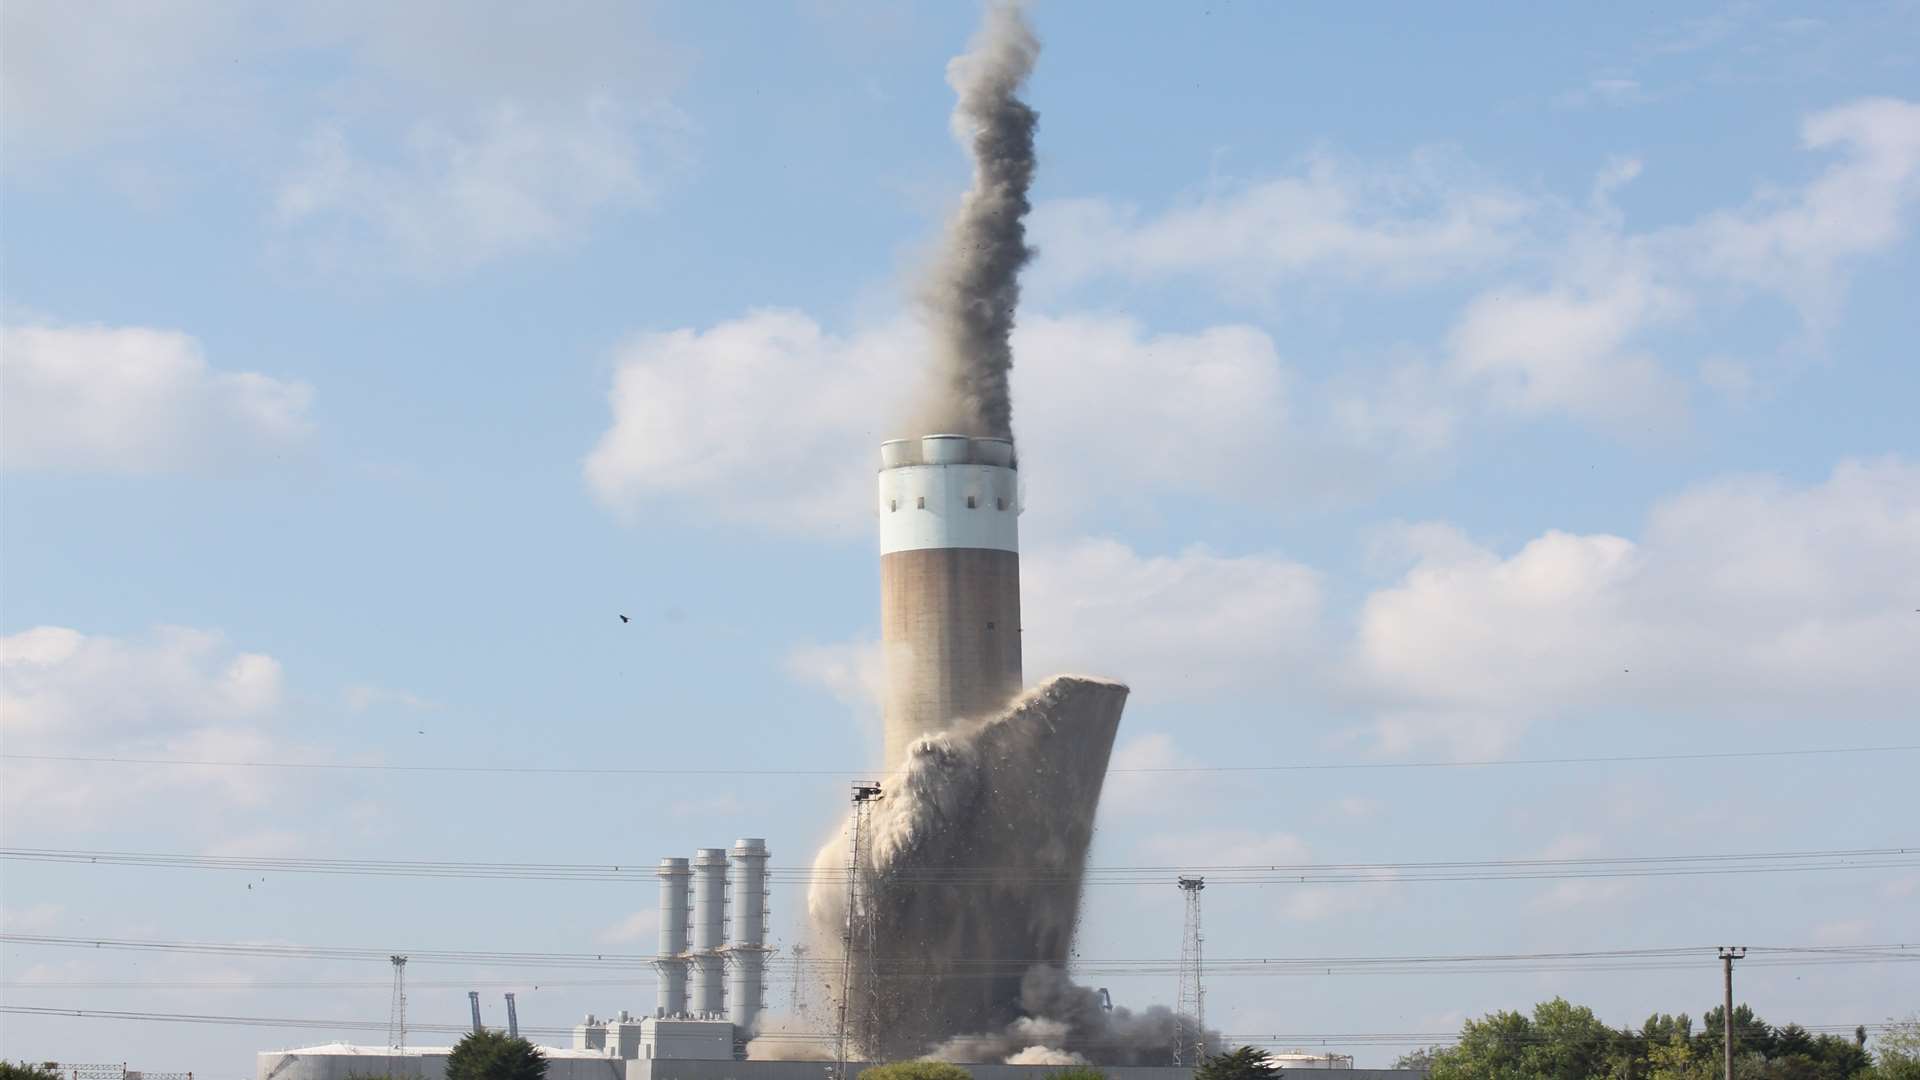 The chimney at Grain Power Station coming down